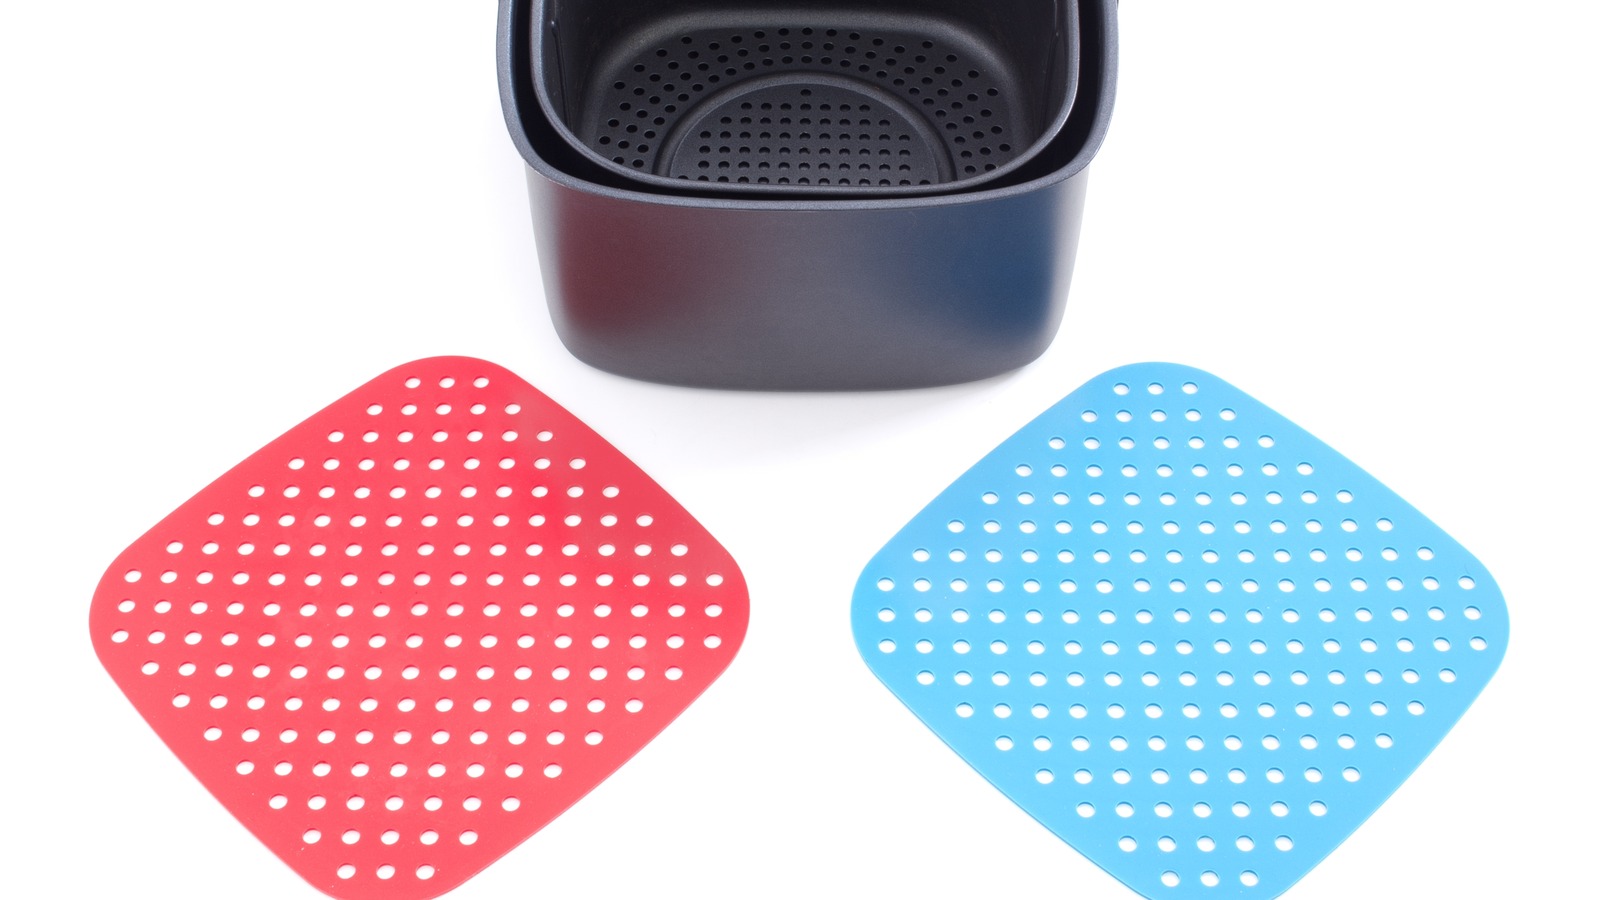 https://www.mashed.com/img/gallery/keep-your-air-fryer-sparkling-clean-with-silicone-liners/l-intro-1695166109.jpg